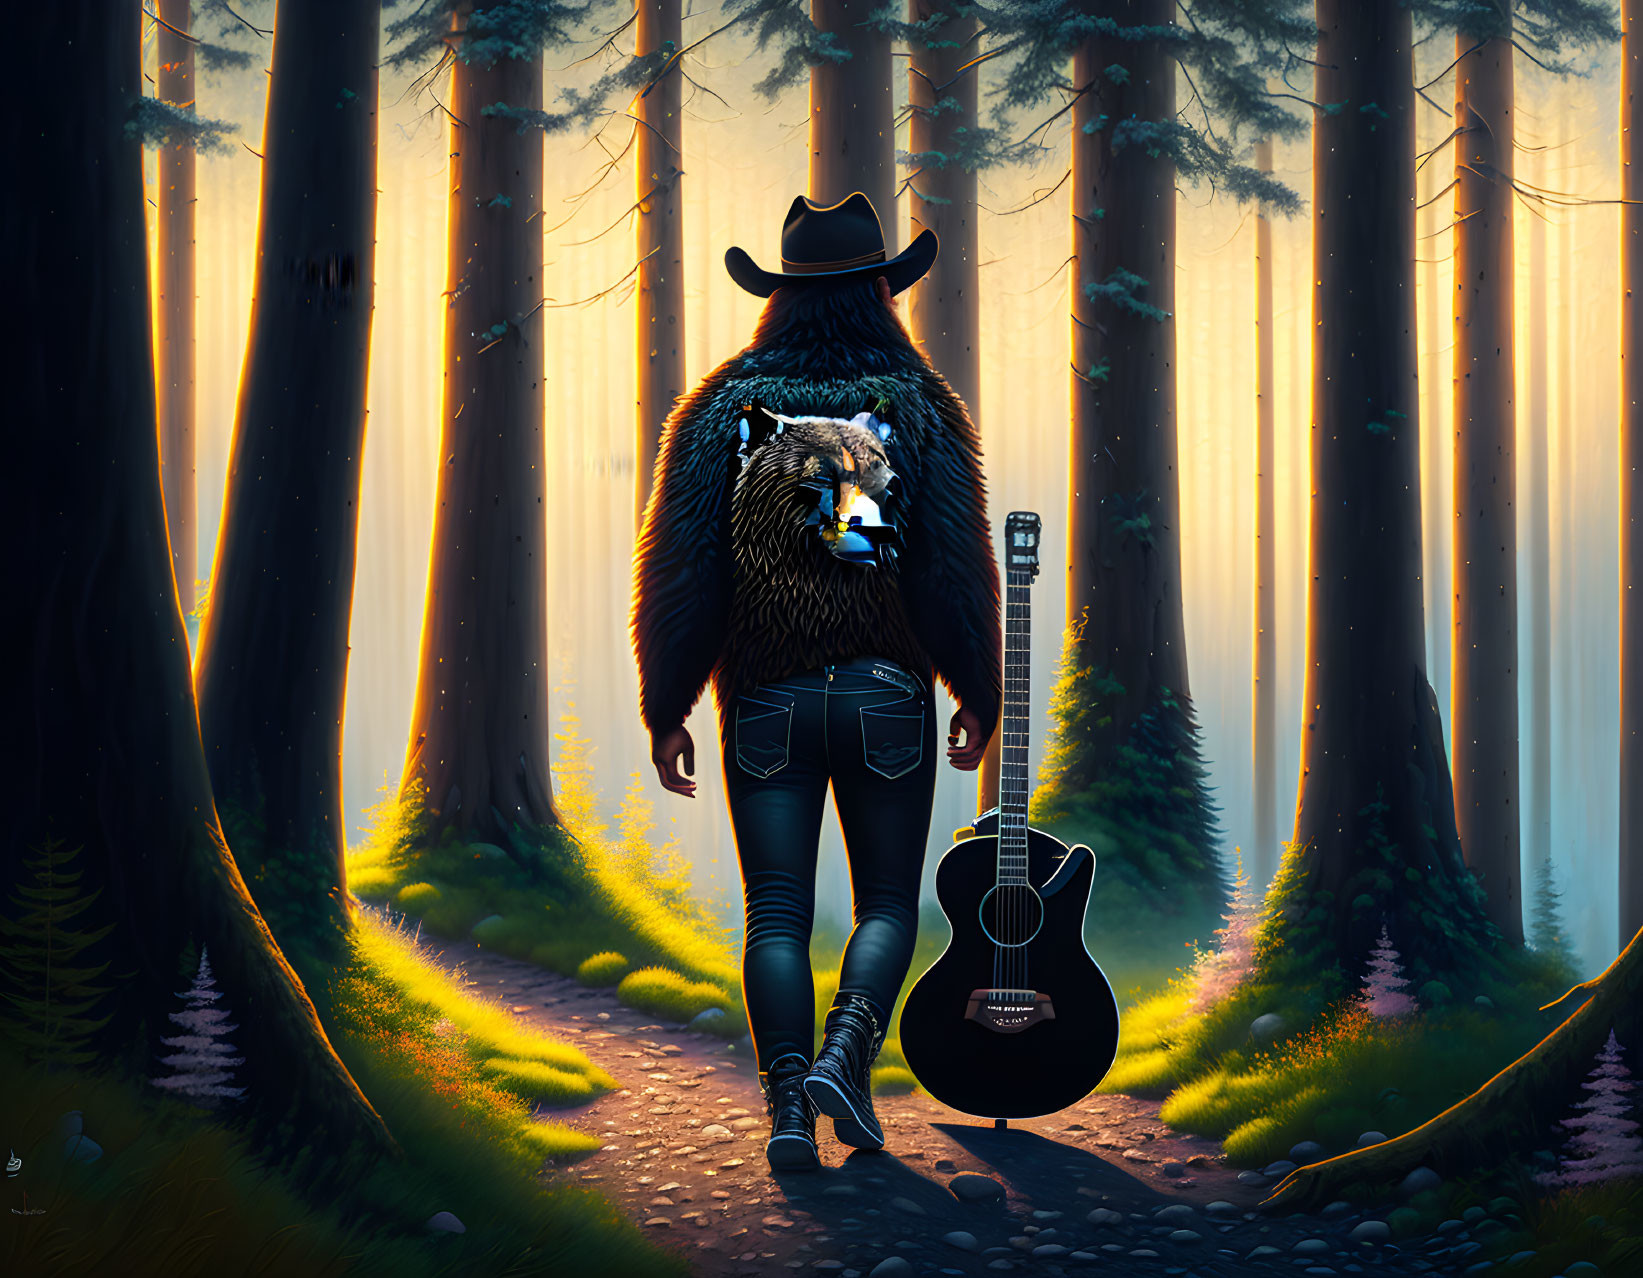 Morning. Forest. Guitar.